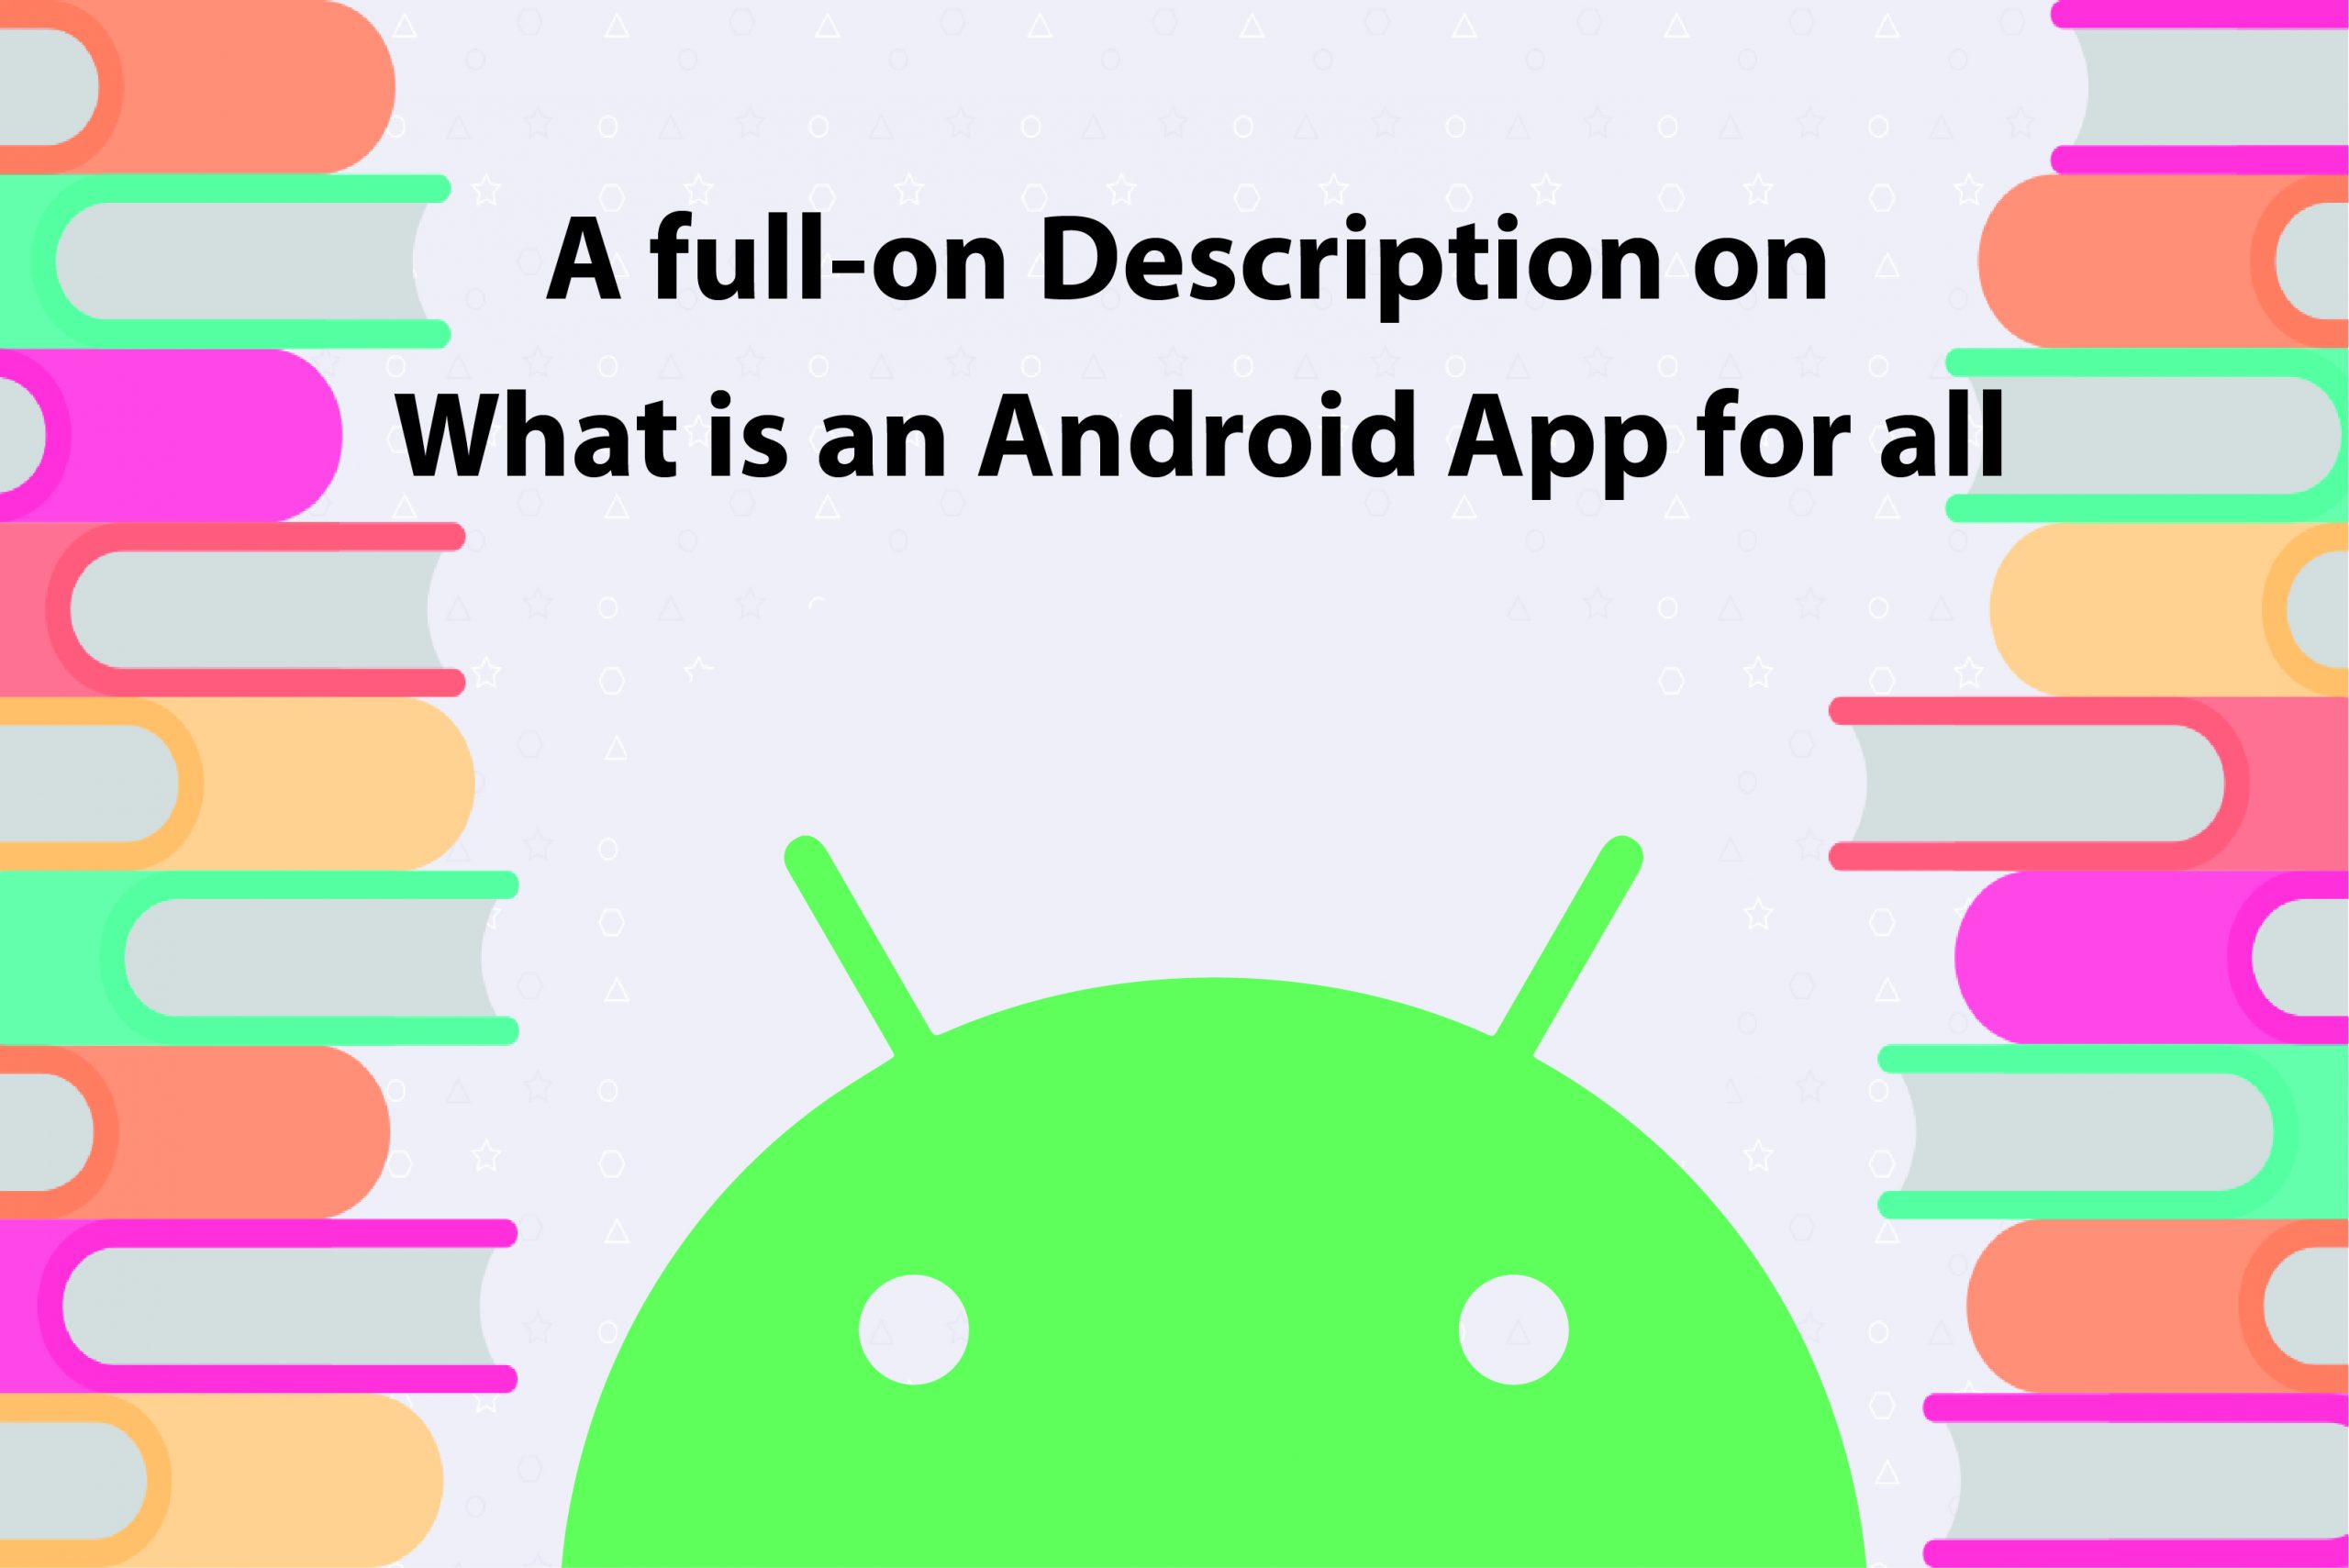 A full-on Description on What is an Android App for all